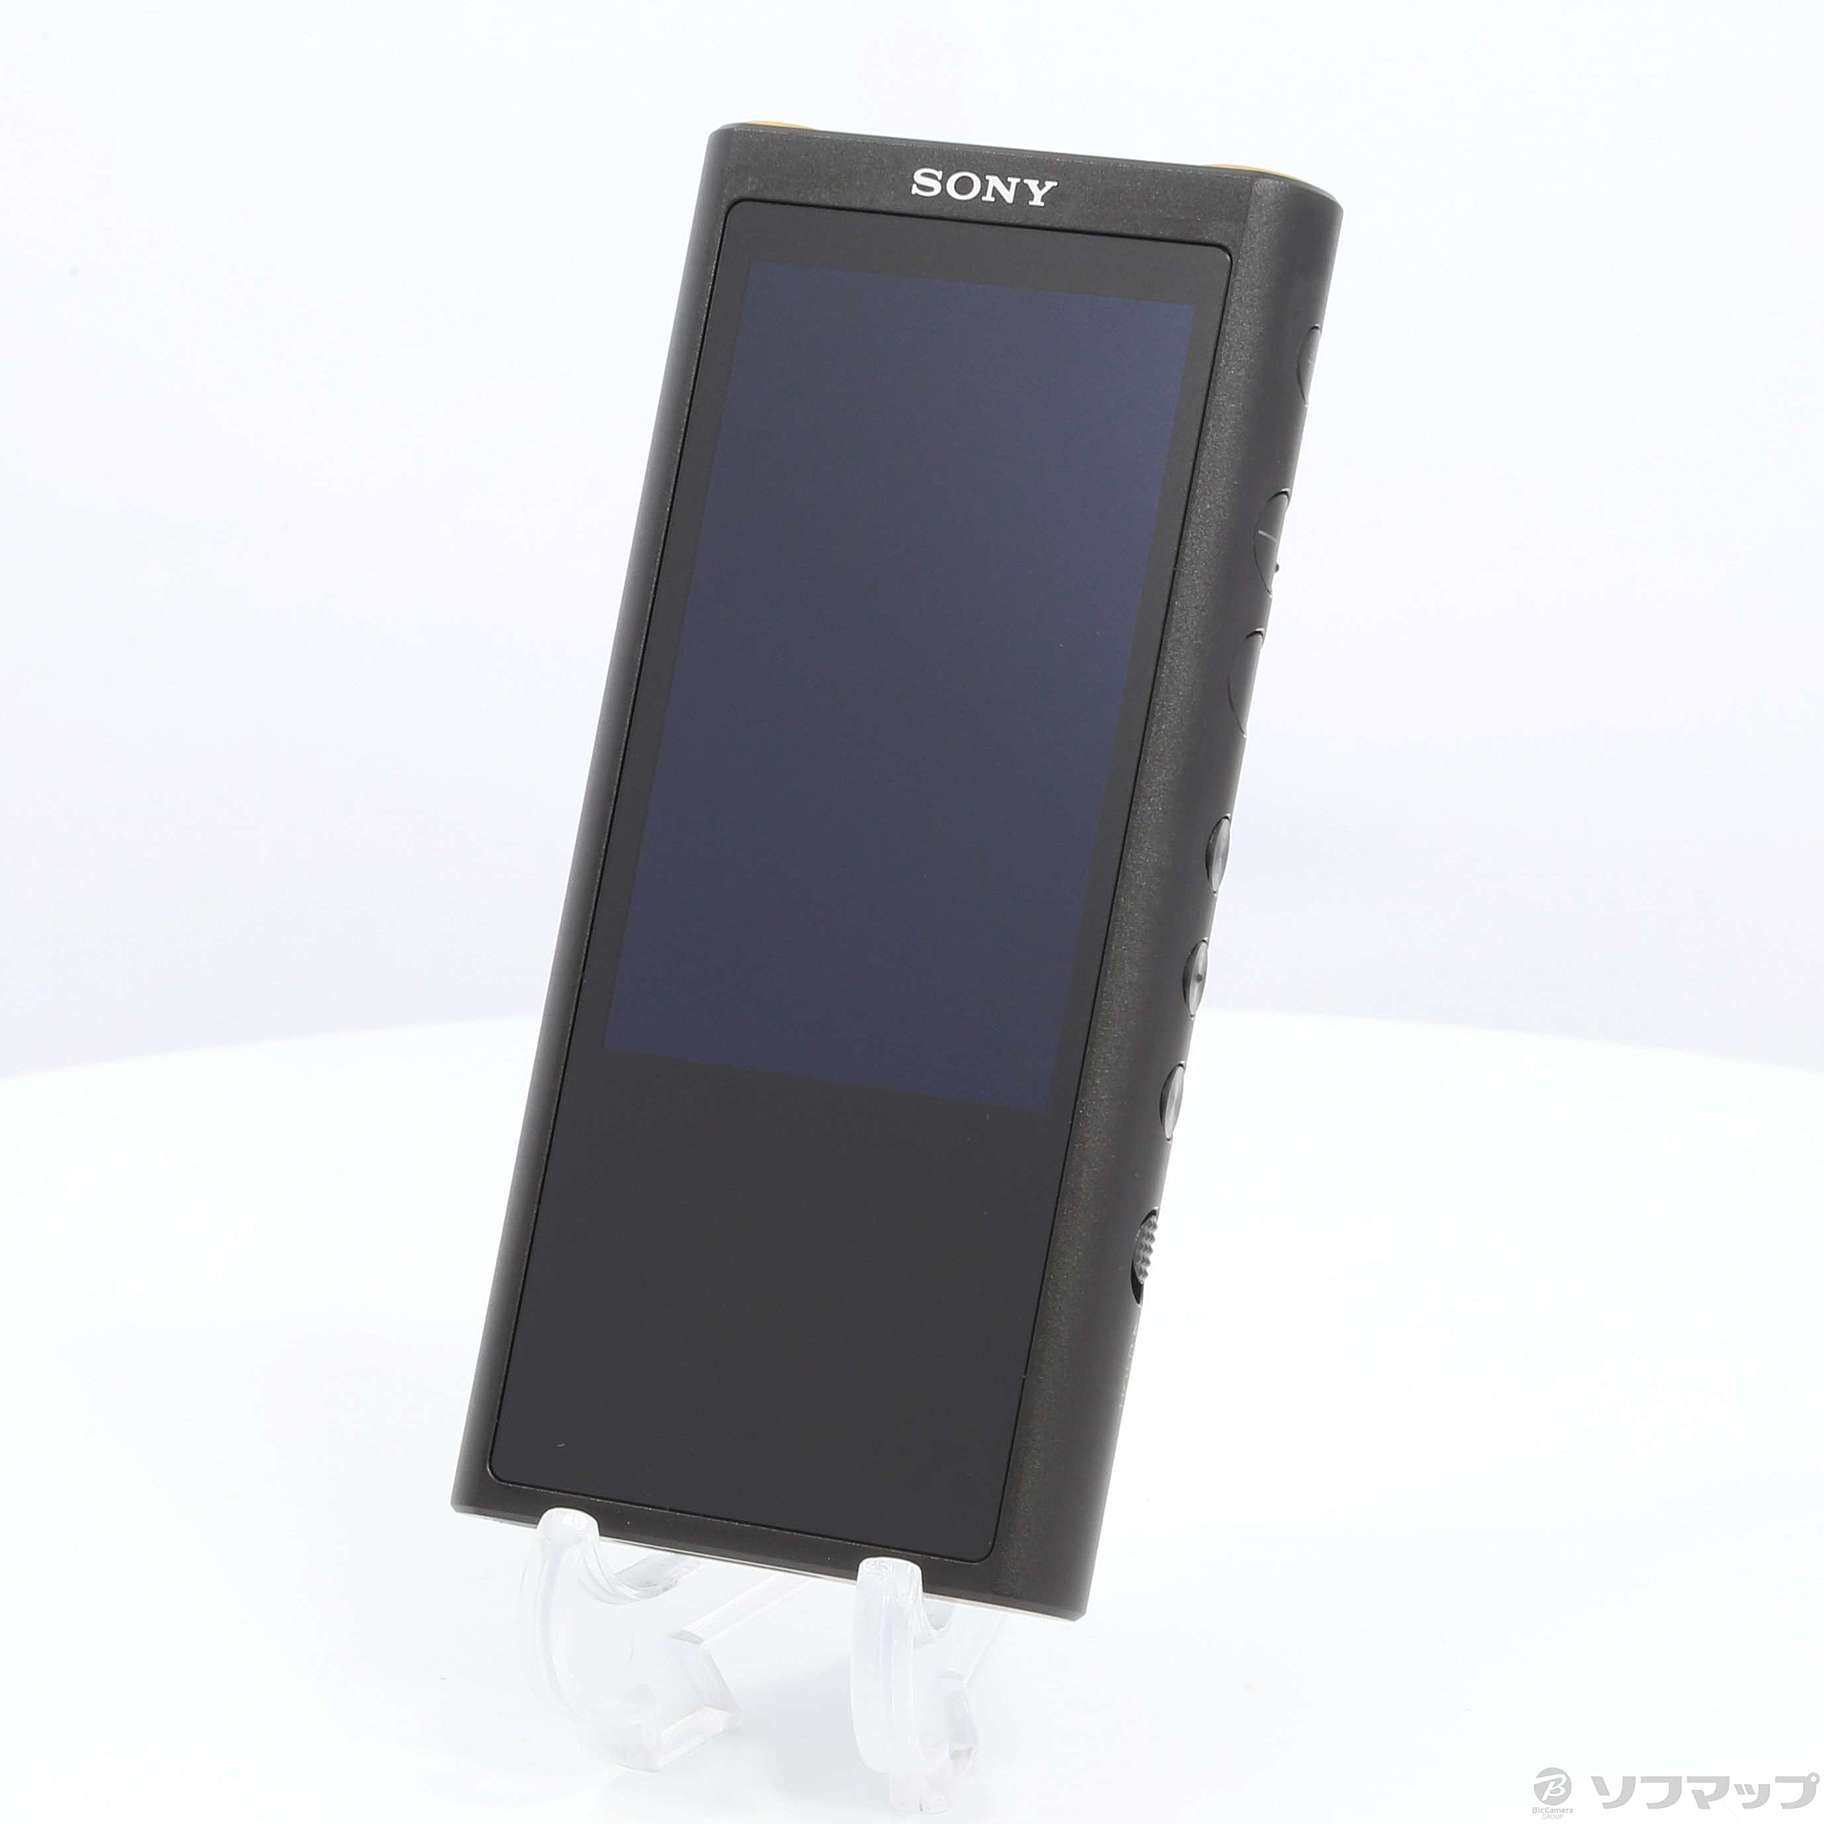 SONY ウォークマン ZX NW-ZX300G(B) - library.iainponorogo.ac.id